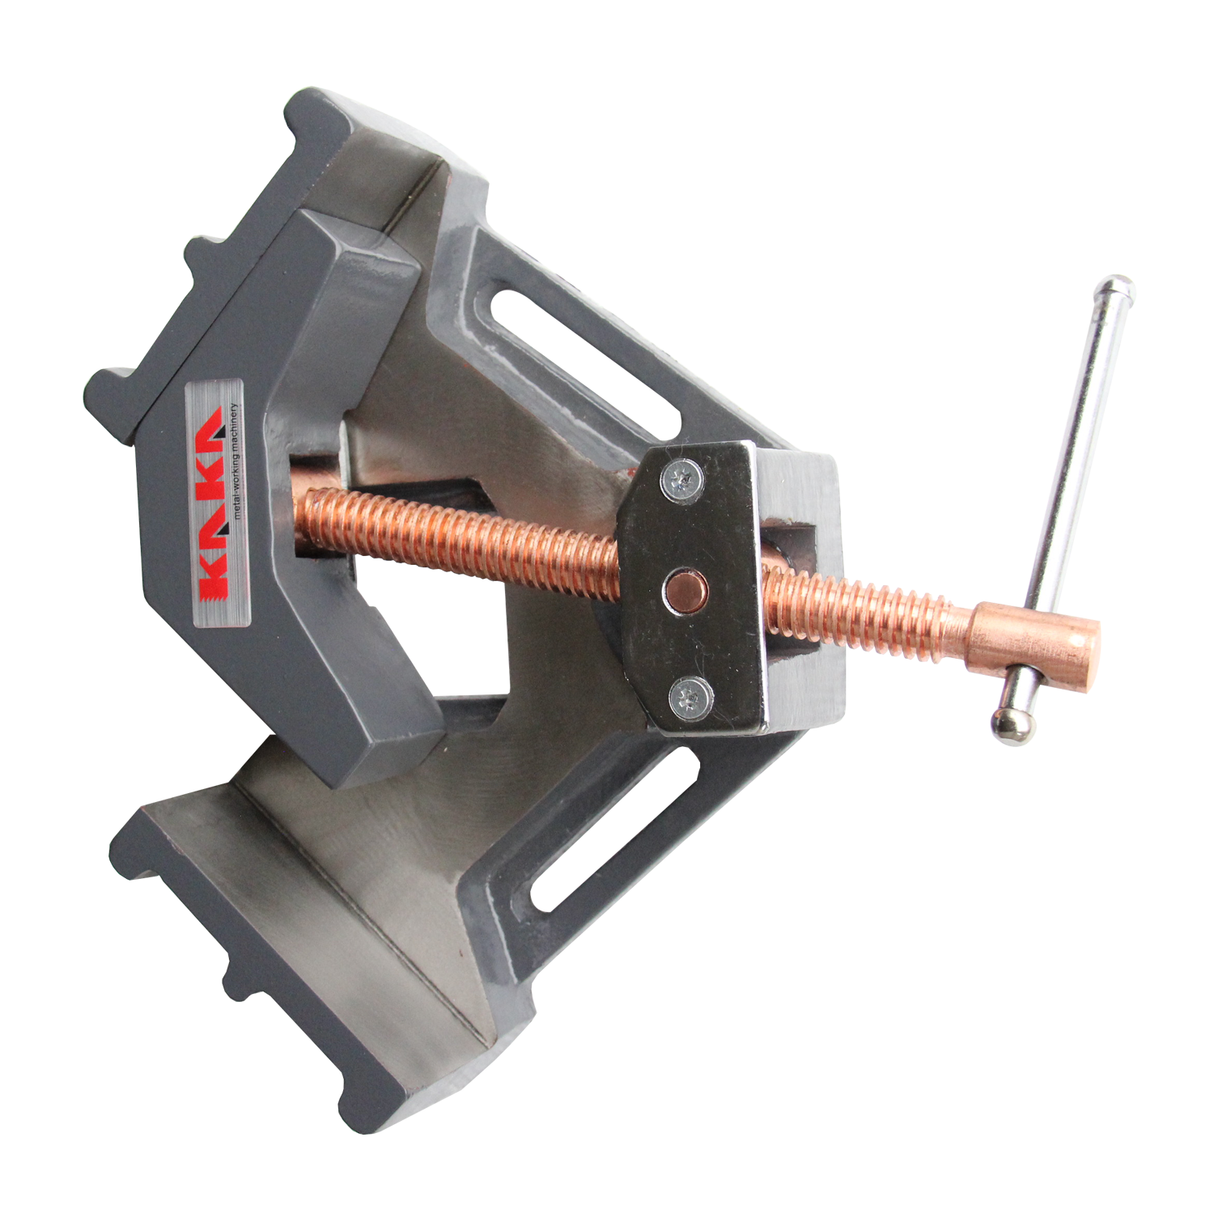 Versatile 90 Degree Angle Miter Vise - Ideal for Woodworking, Photo Framing, Welding and More!